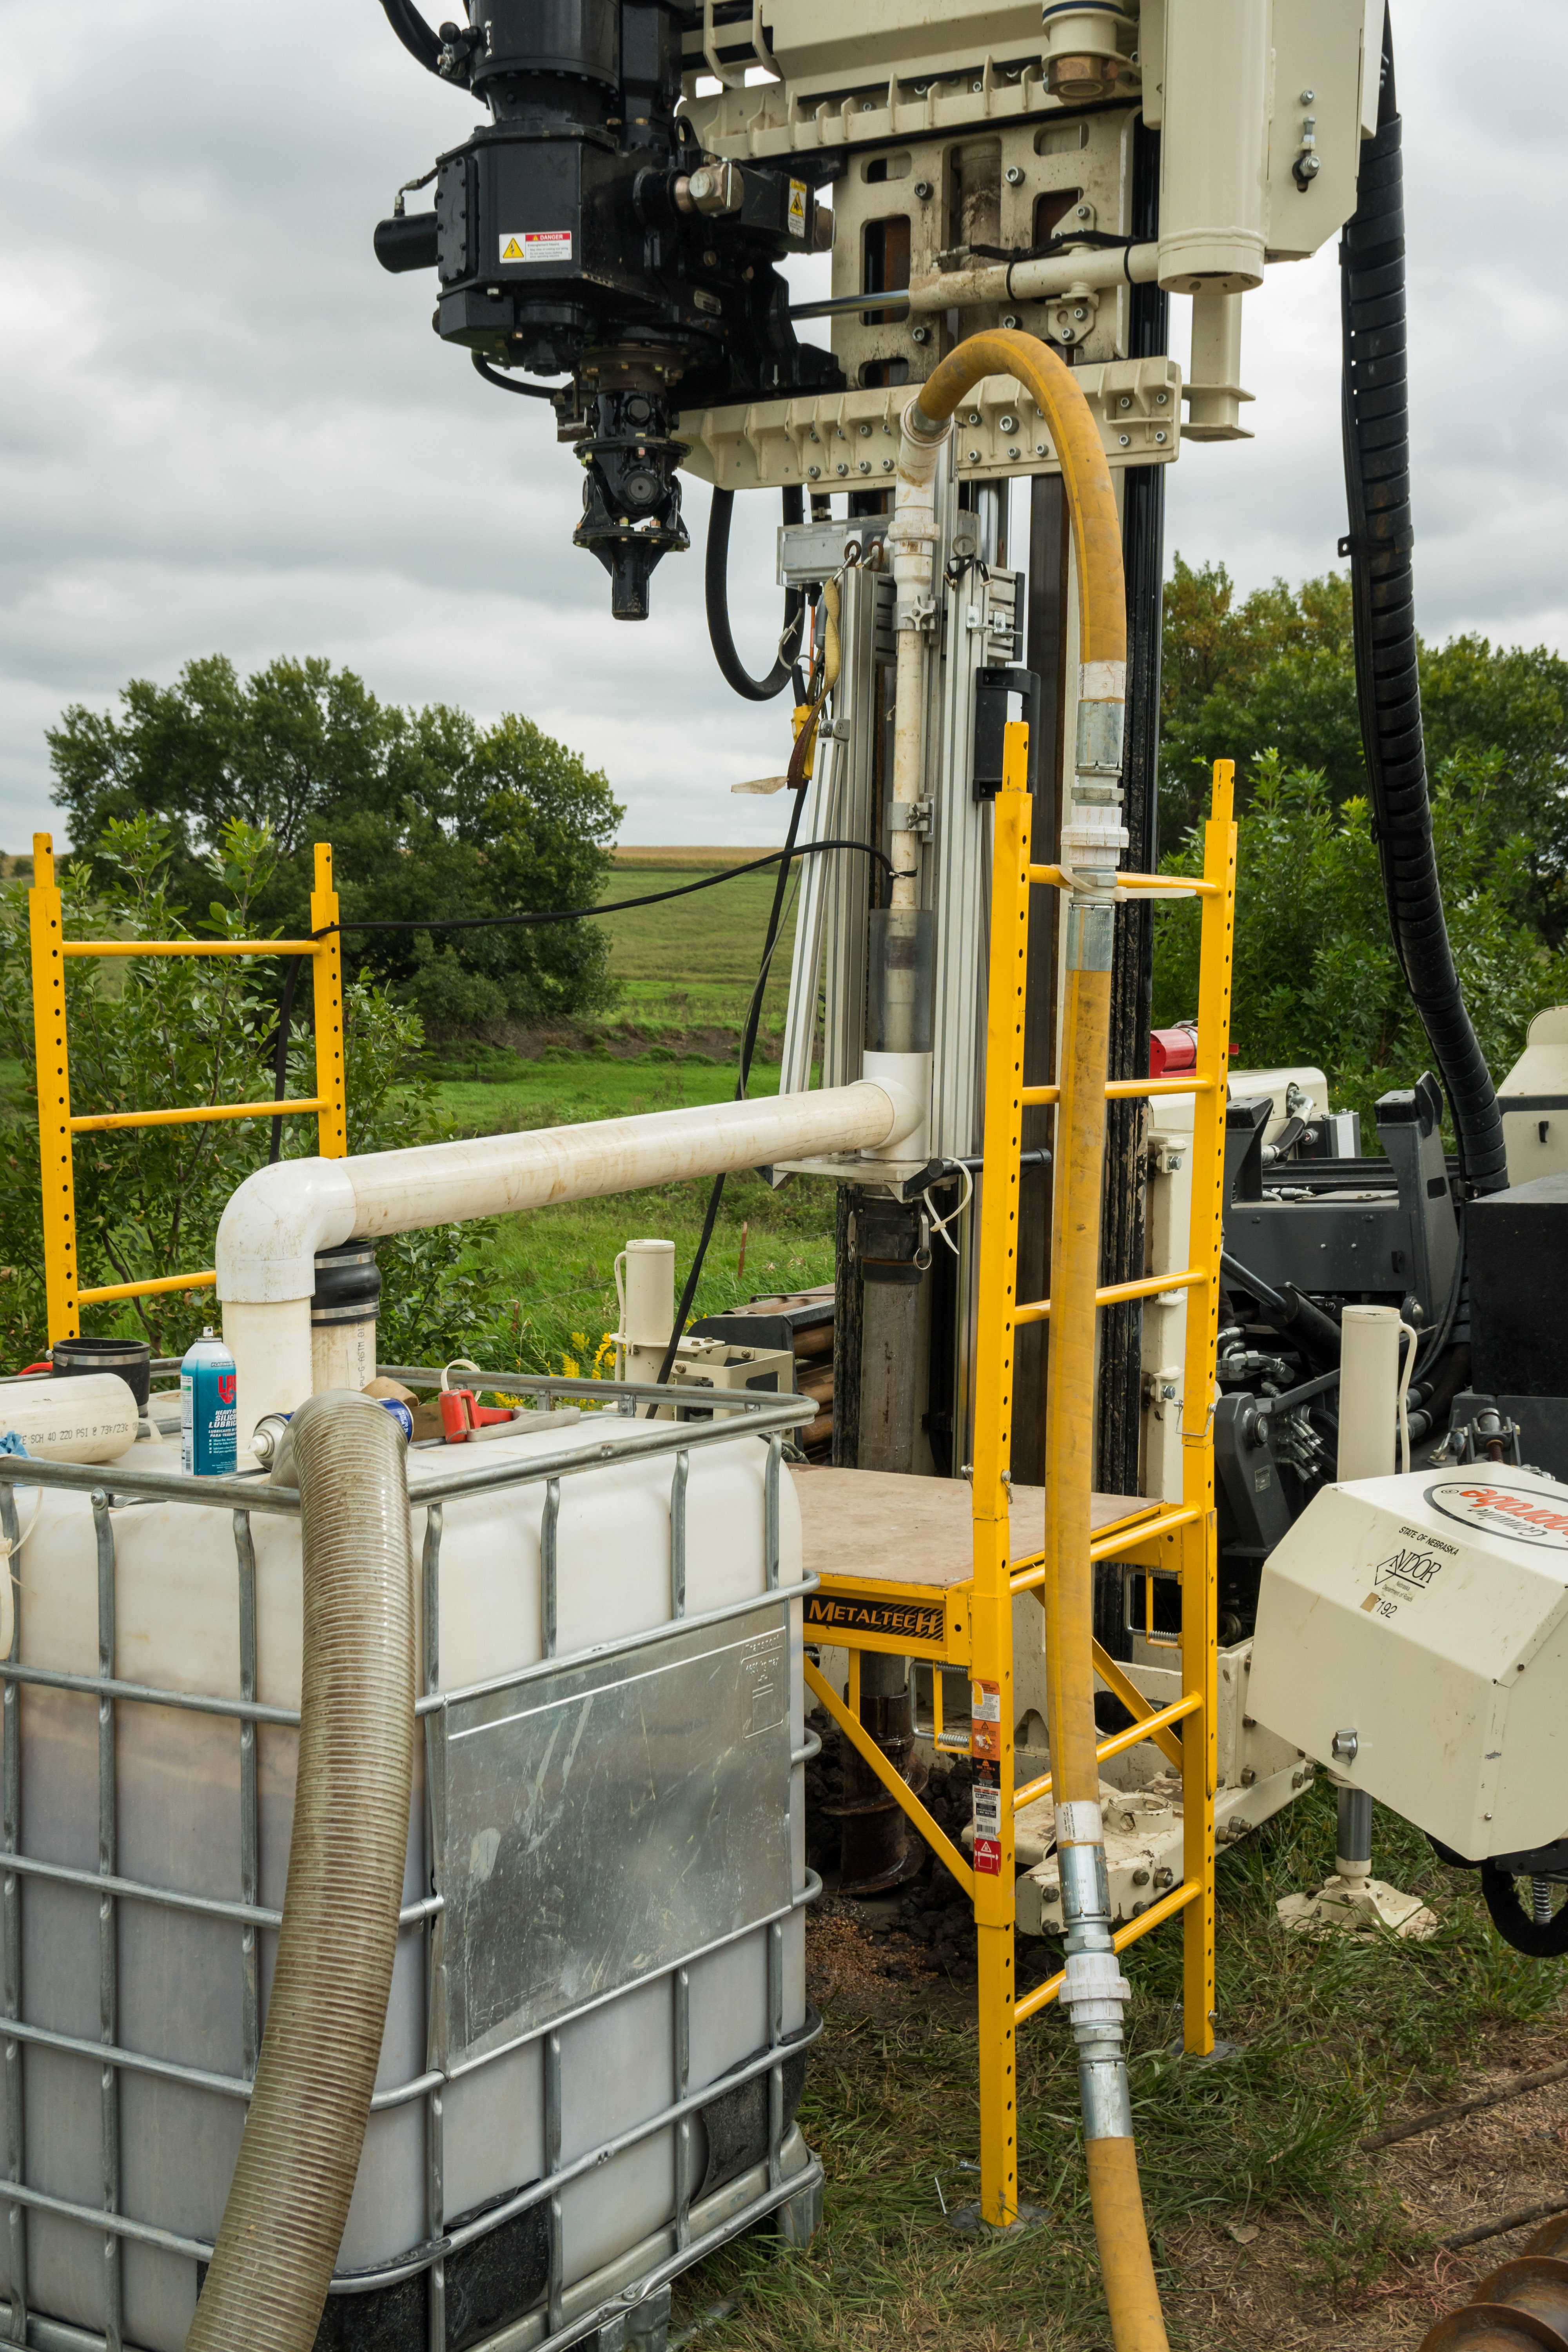 The photo depicts the typical In-Situ Scour Testing Device (ISTD) test setup in the field. The Advanced Linear Drive is shown mounted on top of the casings, which protrude from the auger section in the ground. The drill rig, used to auger the borehole for the test, is located behind the ISTD equipment. A series of flexible hoses attaches to the top of the device, where they connect to a 90-degree bend and then to the PVC piping mounted to the linear drive. The outlet PVC piping runs from the Advanced Linear Drive to a water tank shown in the foreground. A suction hose runs from the water tank back to the pump. A scaffold is assembled between the drill rig and the water tank to assist the technicians in setting up the device.